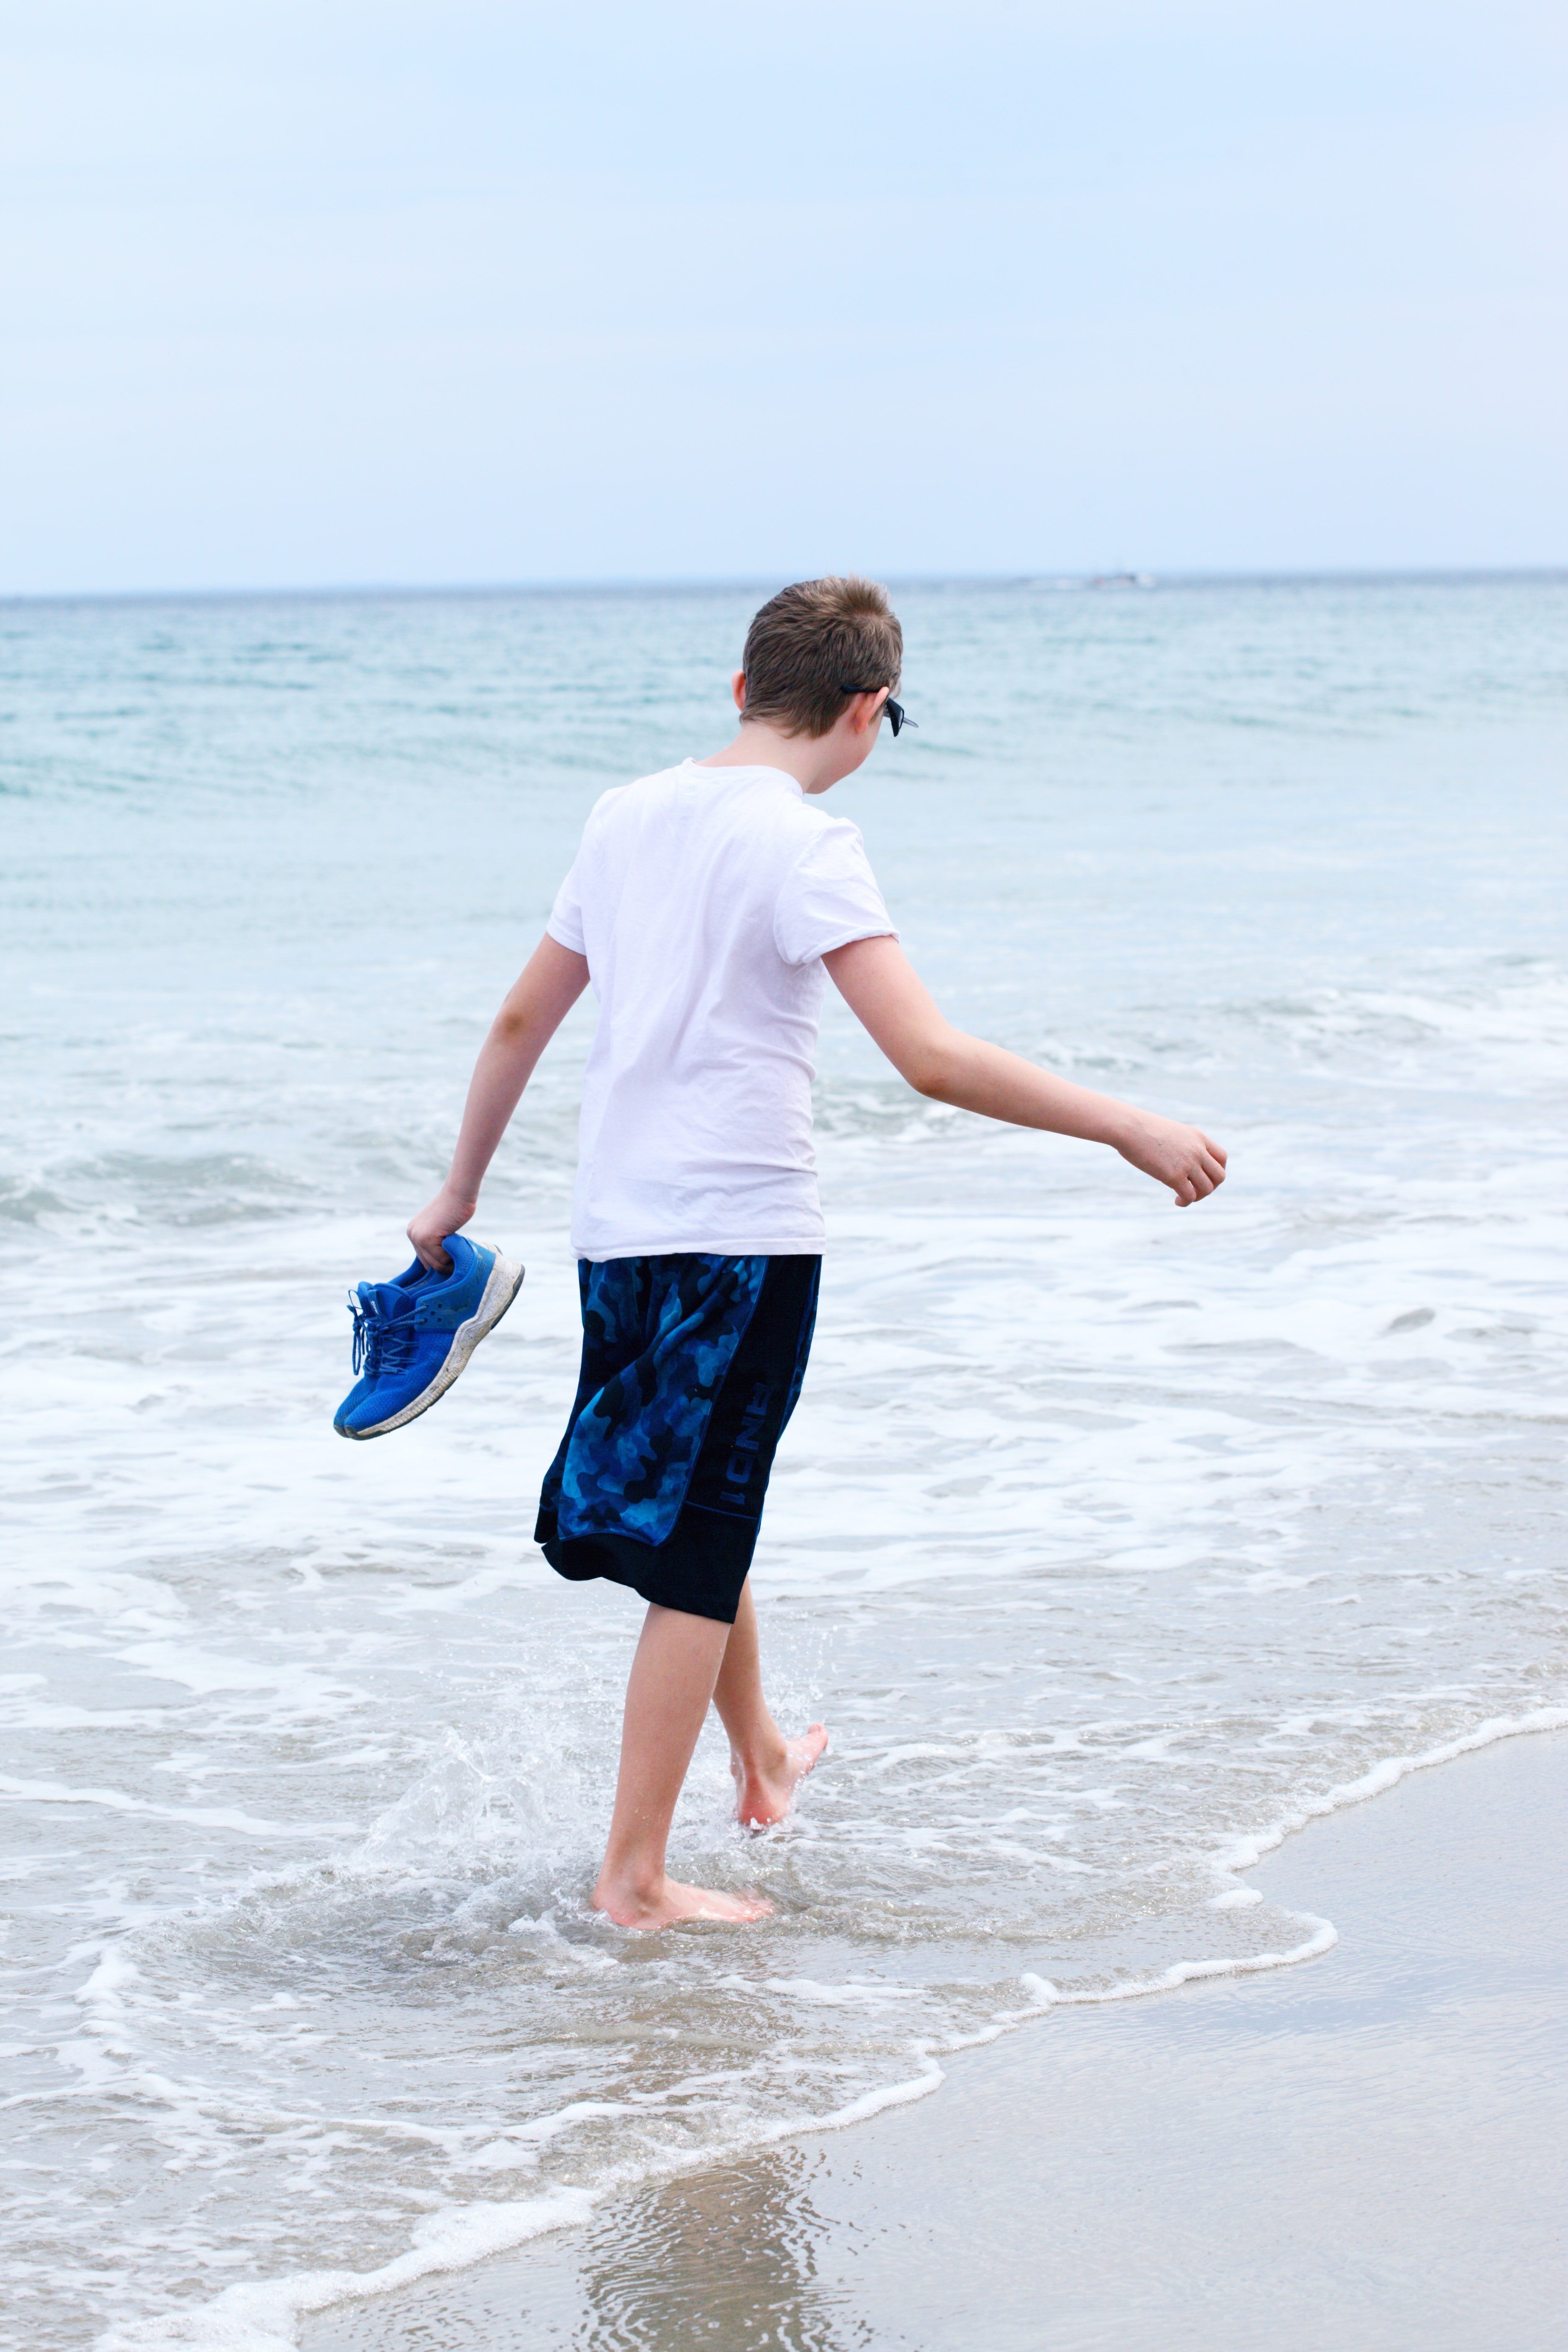 Teen boy in shorts and t-shirt walking in surf carrying blue tennis shoes; image by Alexander Grey, via Unsplash.com.